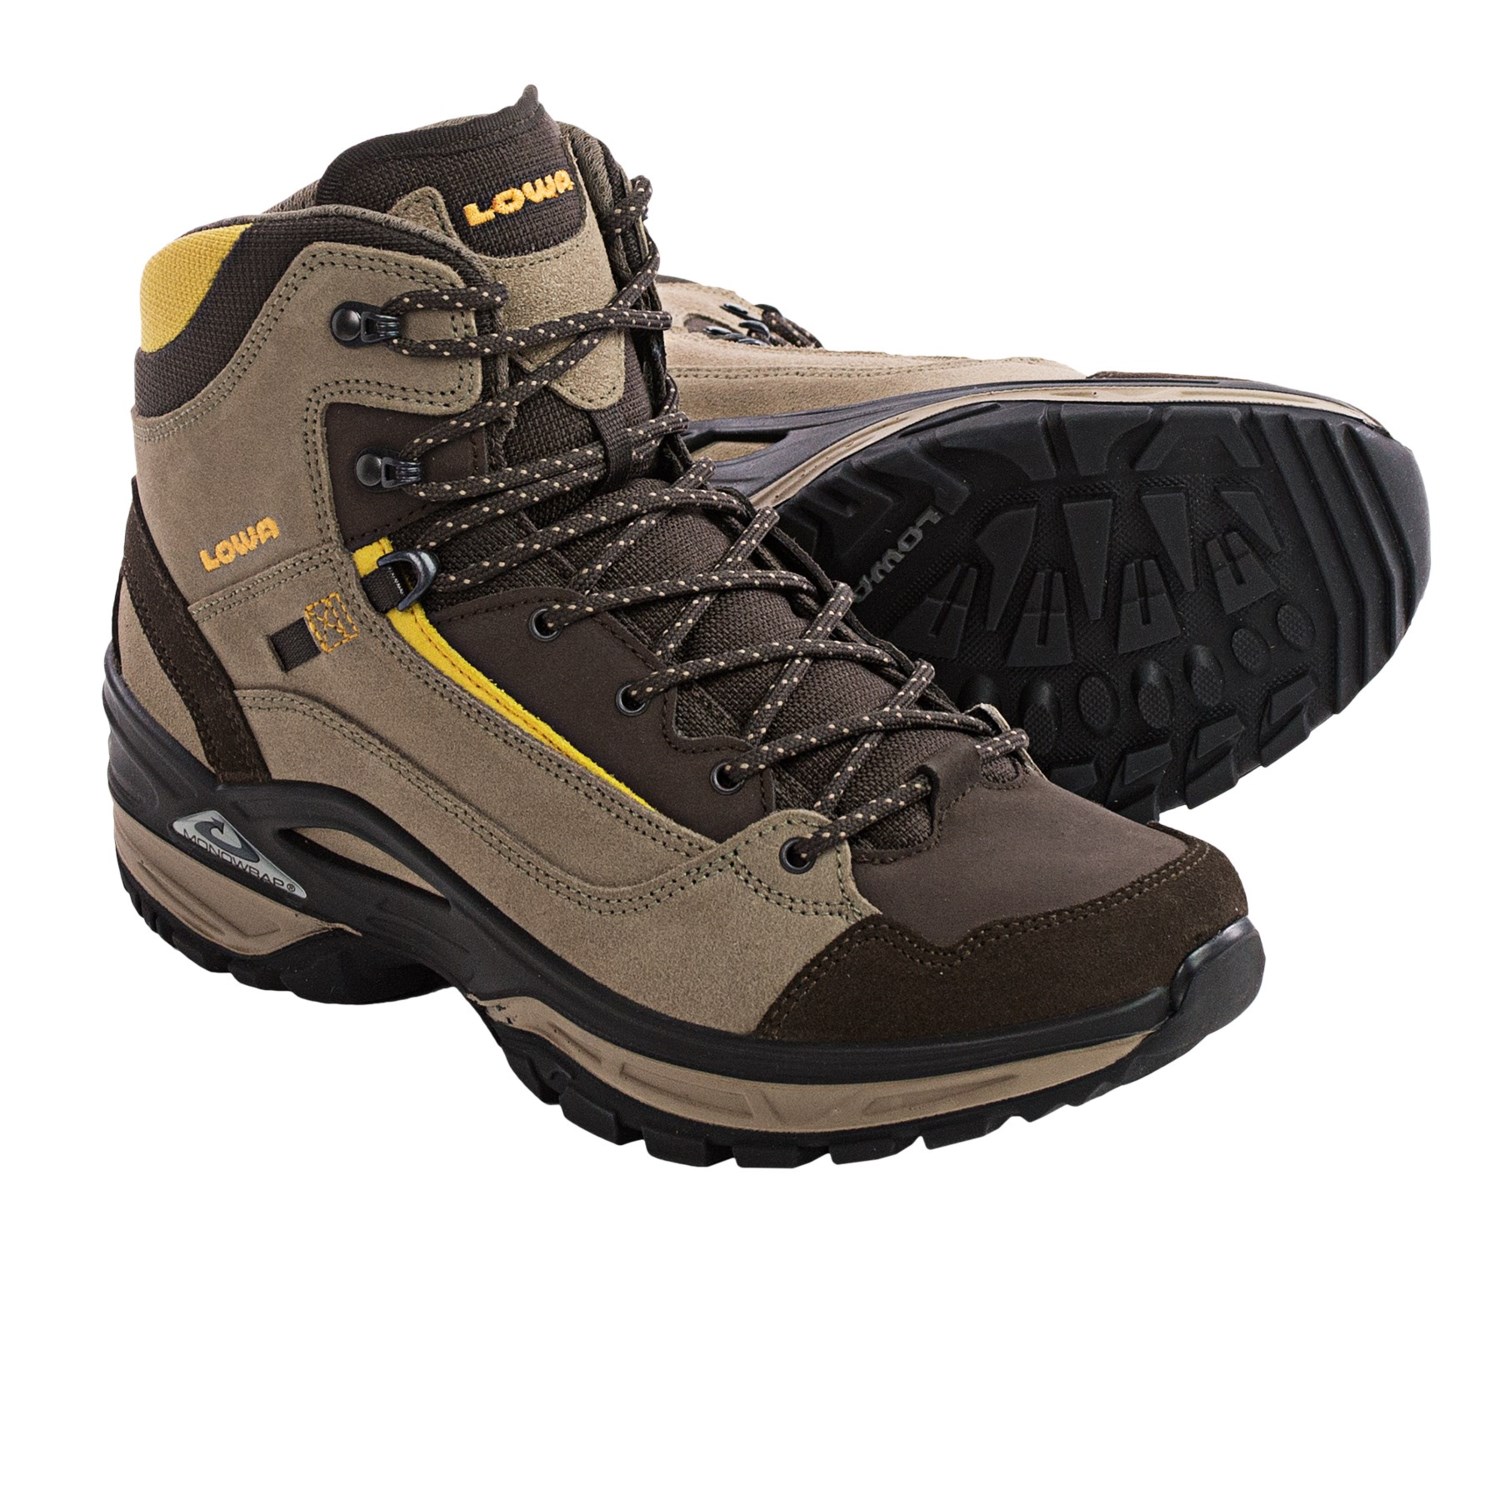 Lowa Tempest Mid Hiking Boots (For Men) 9821R - Save 42%